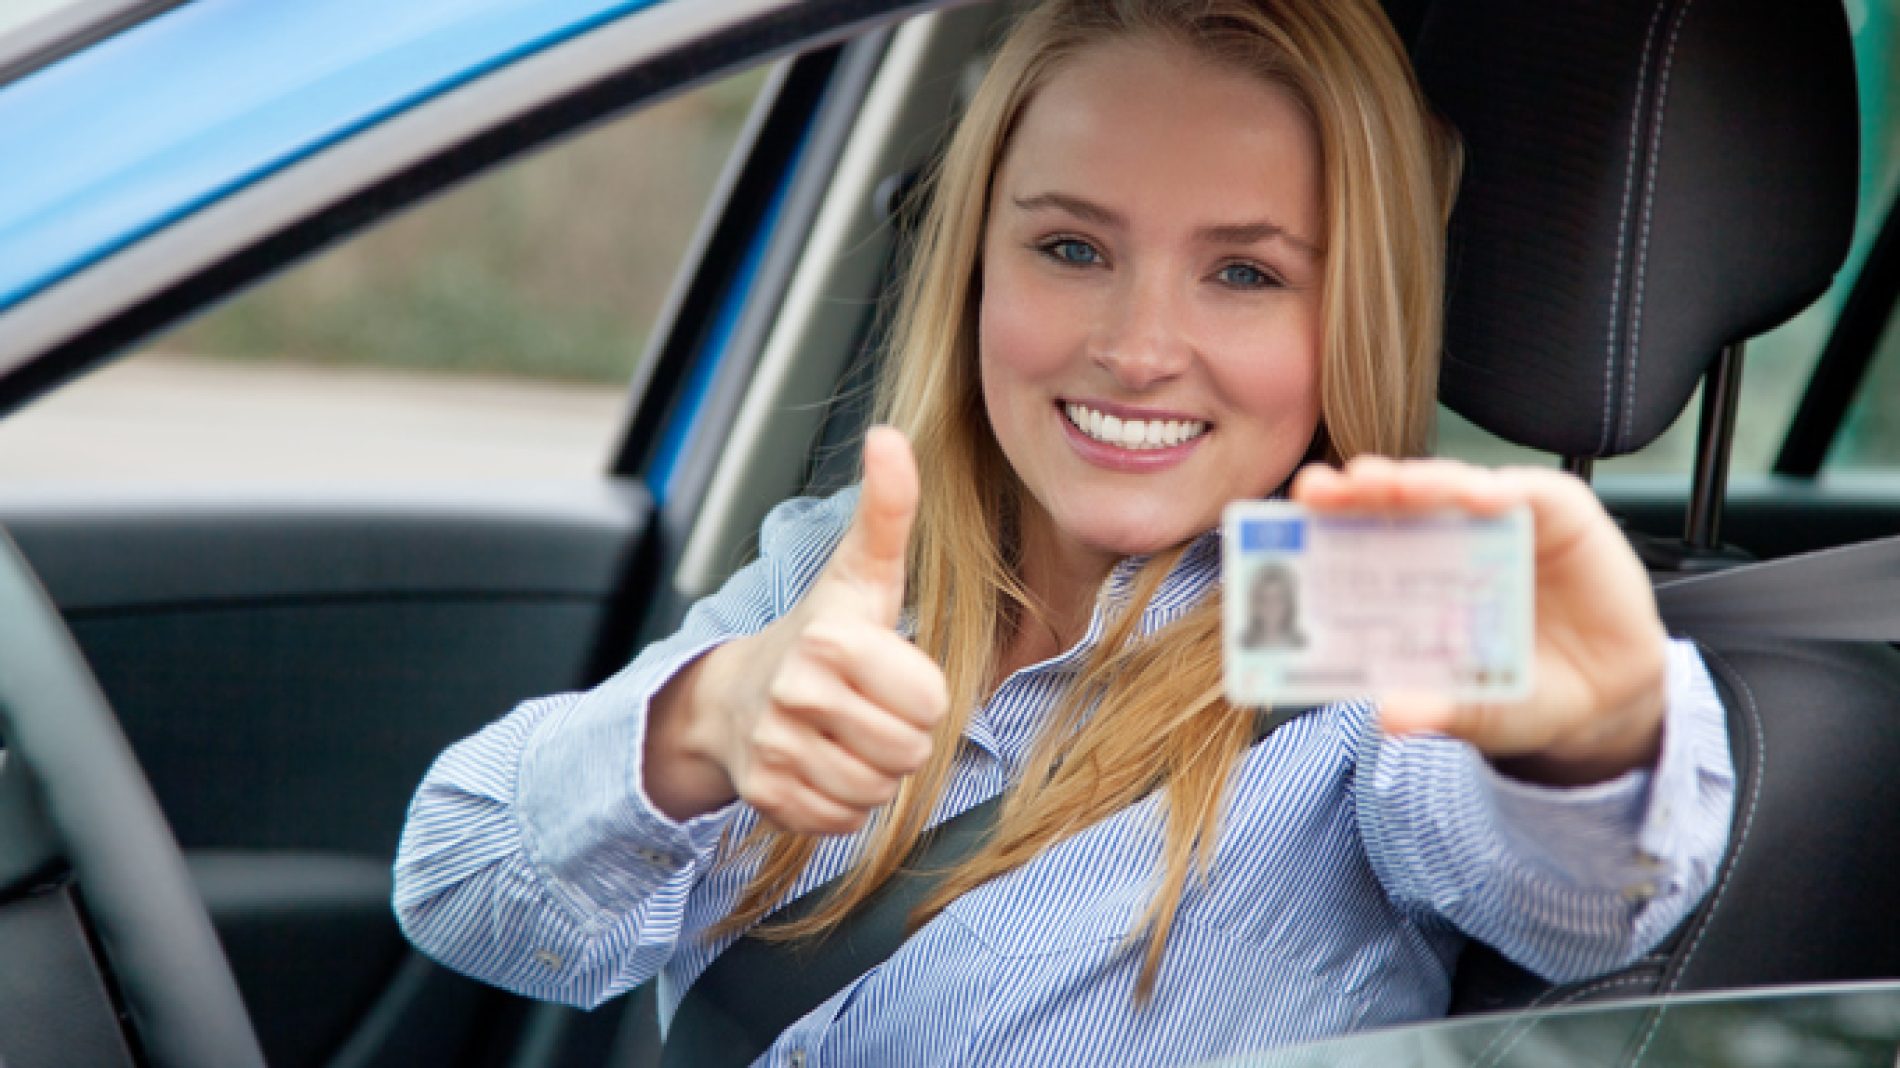 Women holding driving licence in car